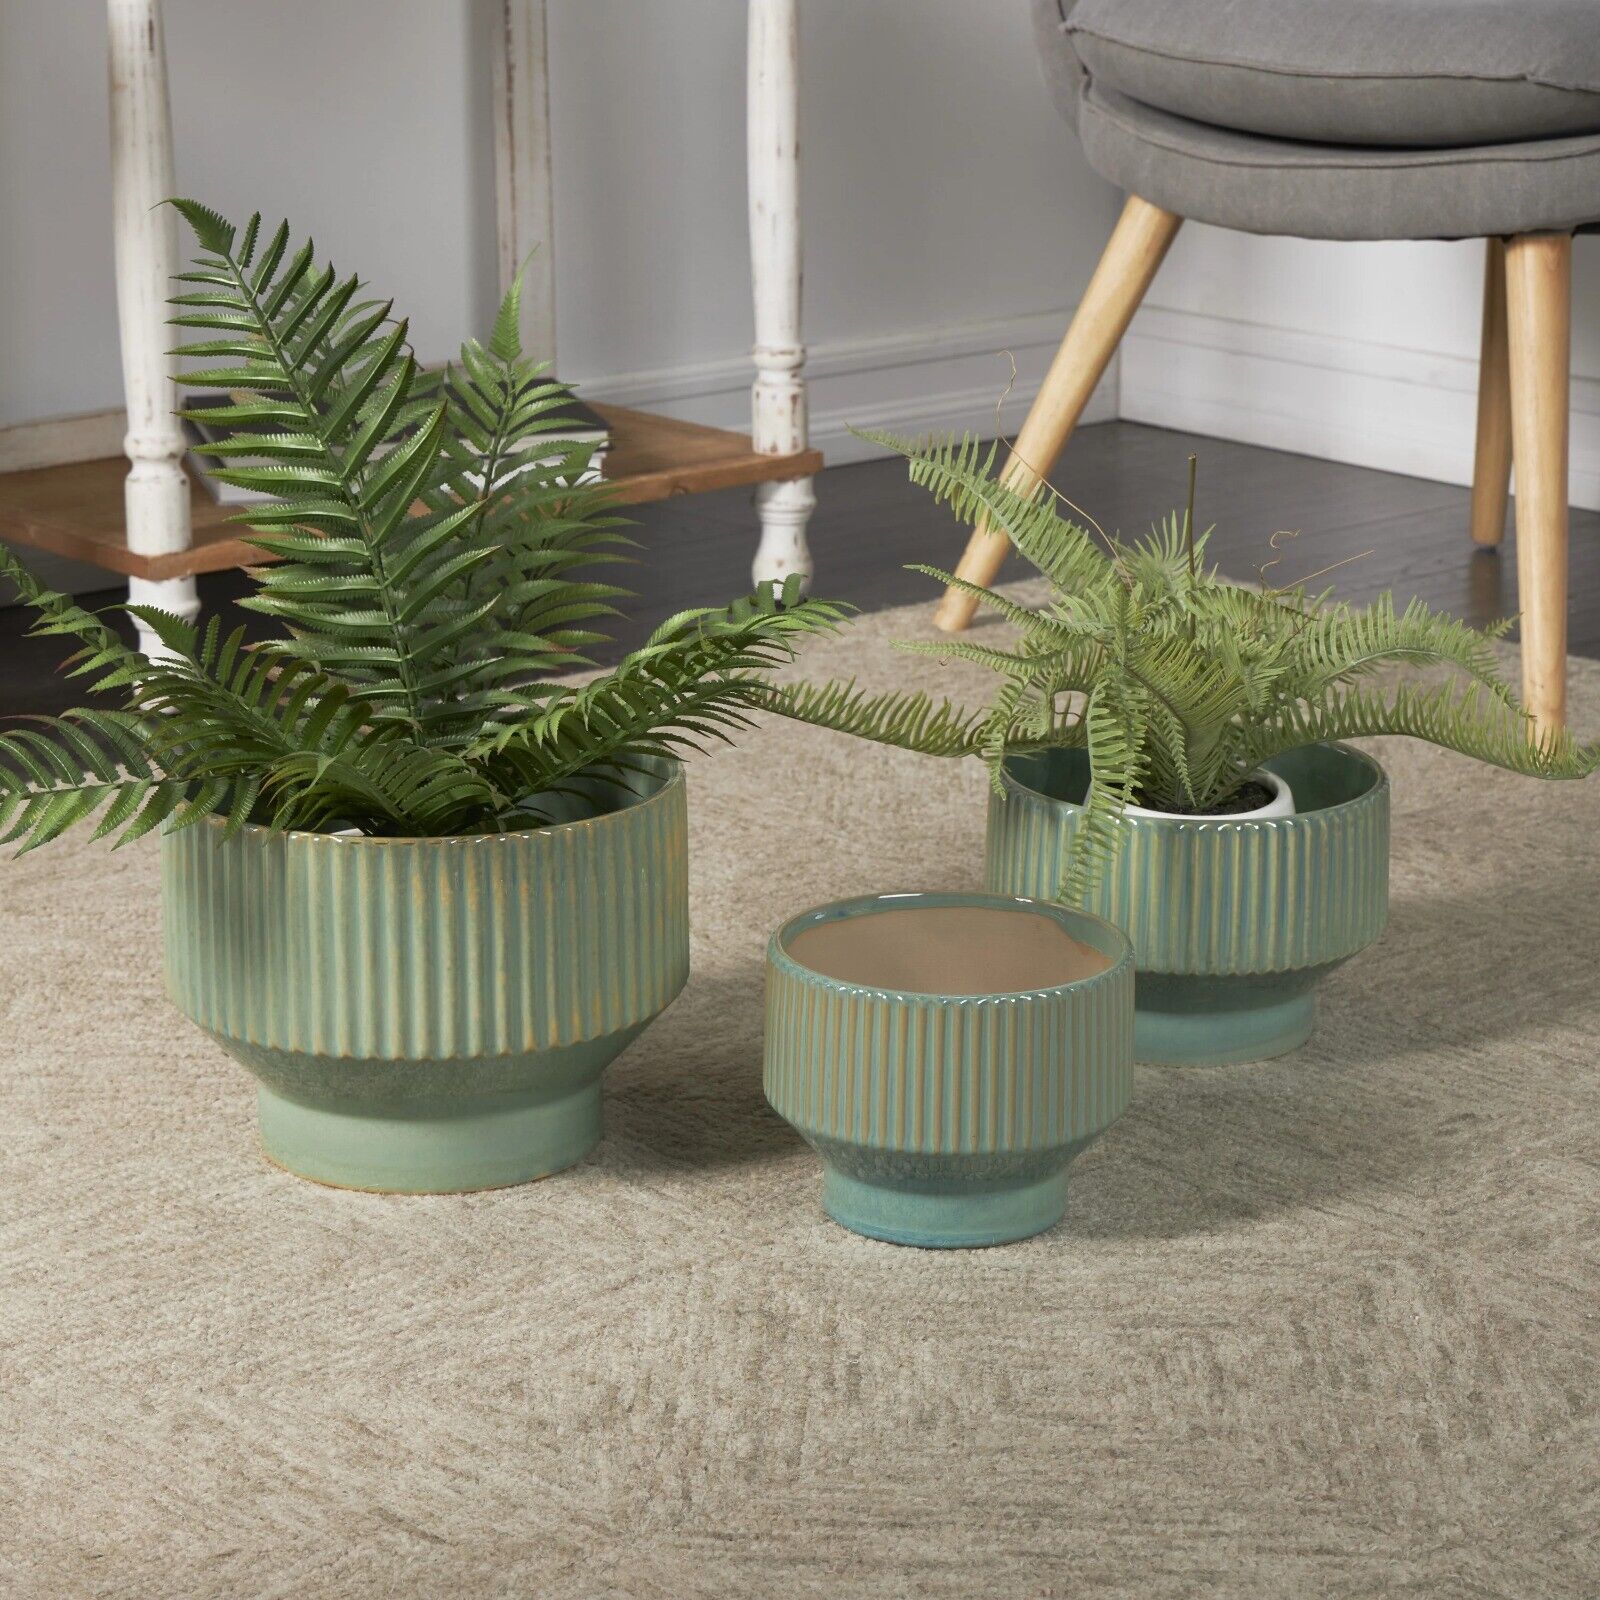 New Green Ceramic Textured Decorative Planter Pot with Linear Grooves